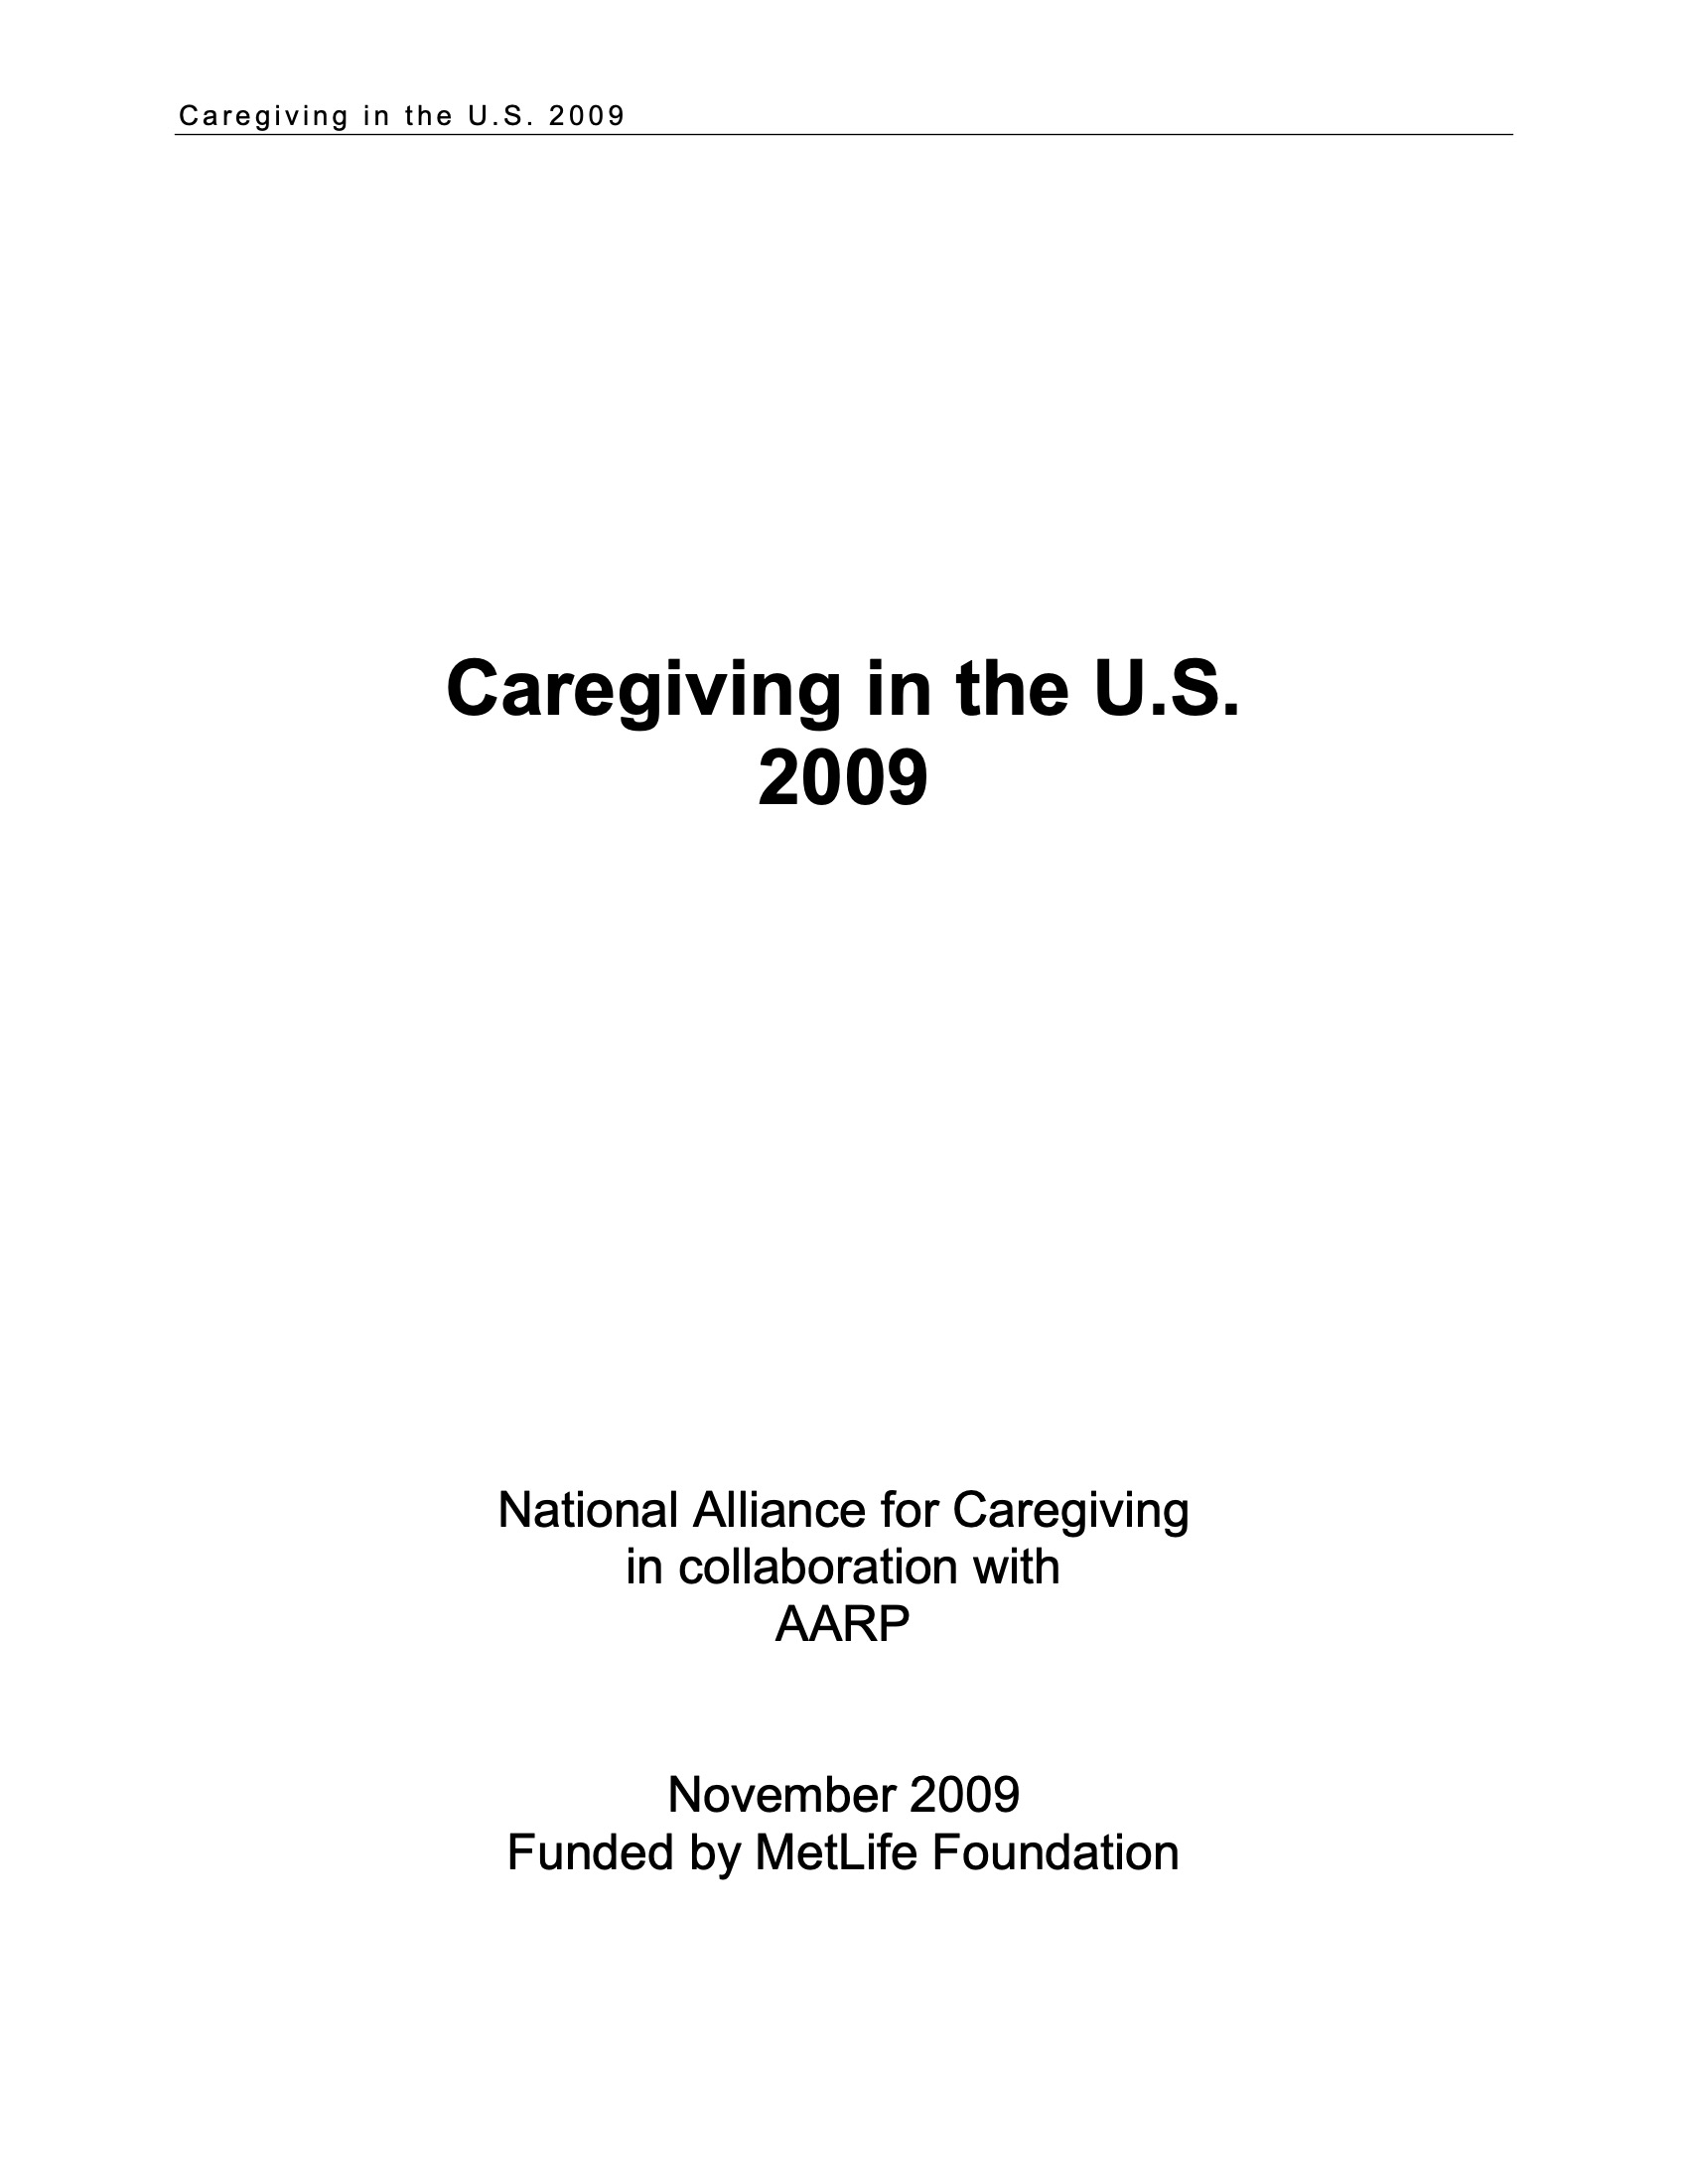 Caregiving in the US 2009 Cover Image